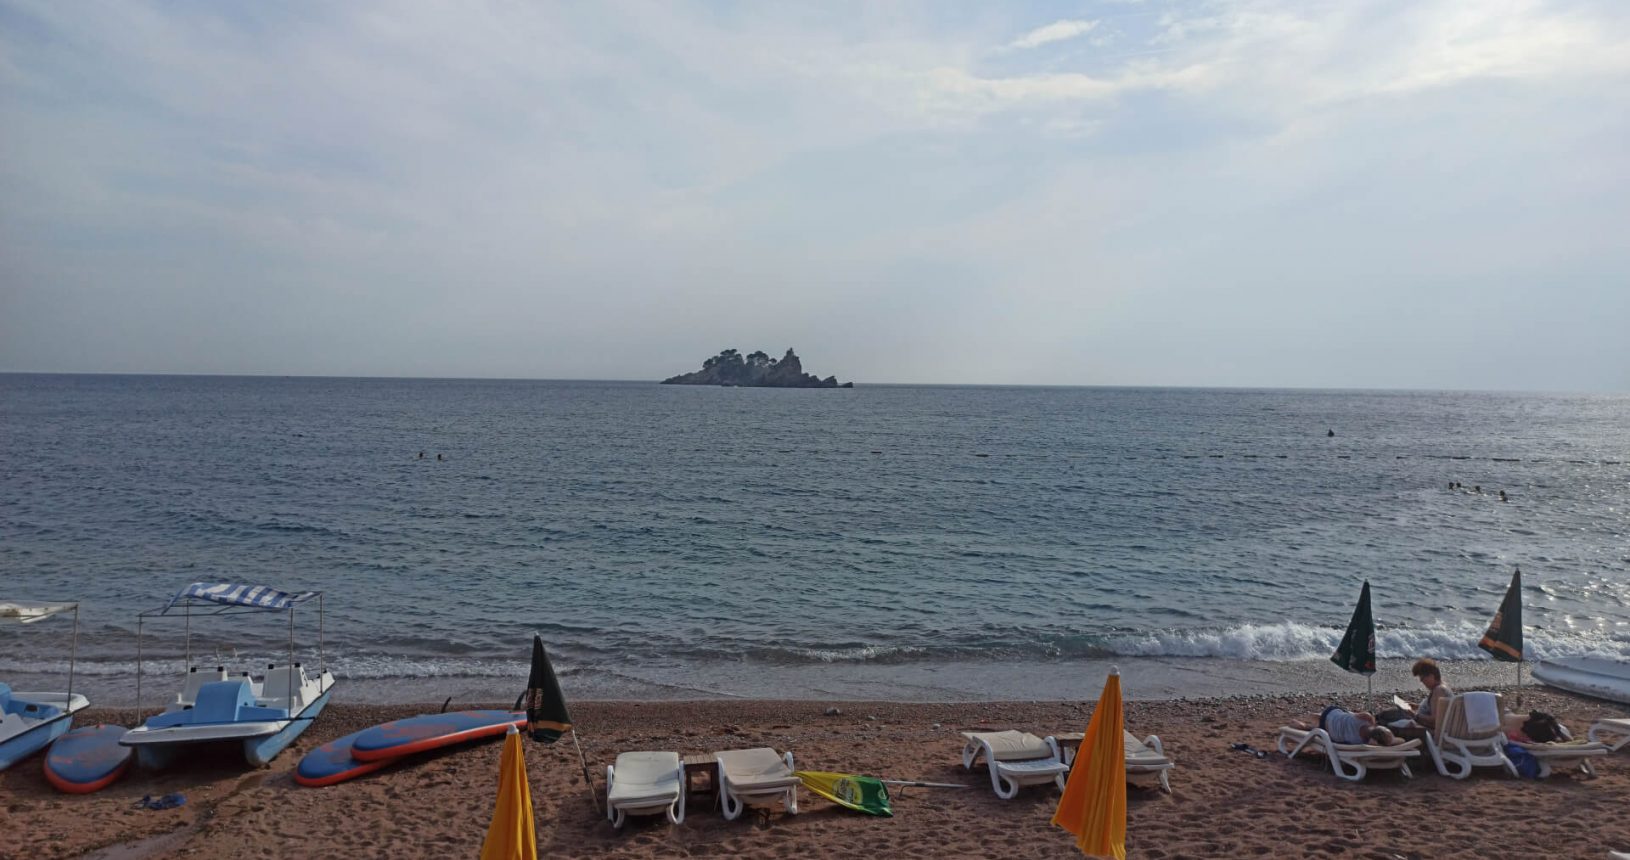 View to the island from the beach in Petrovac